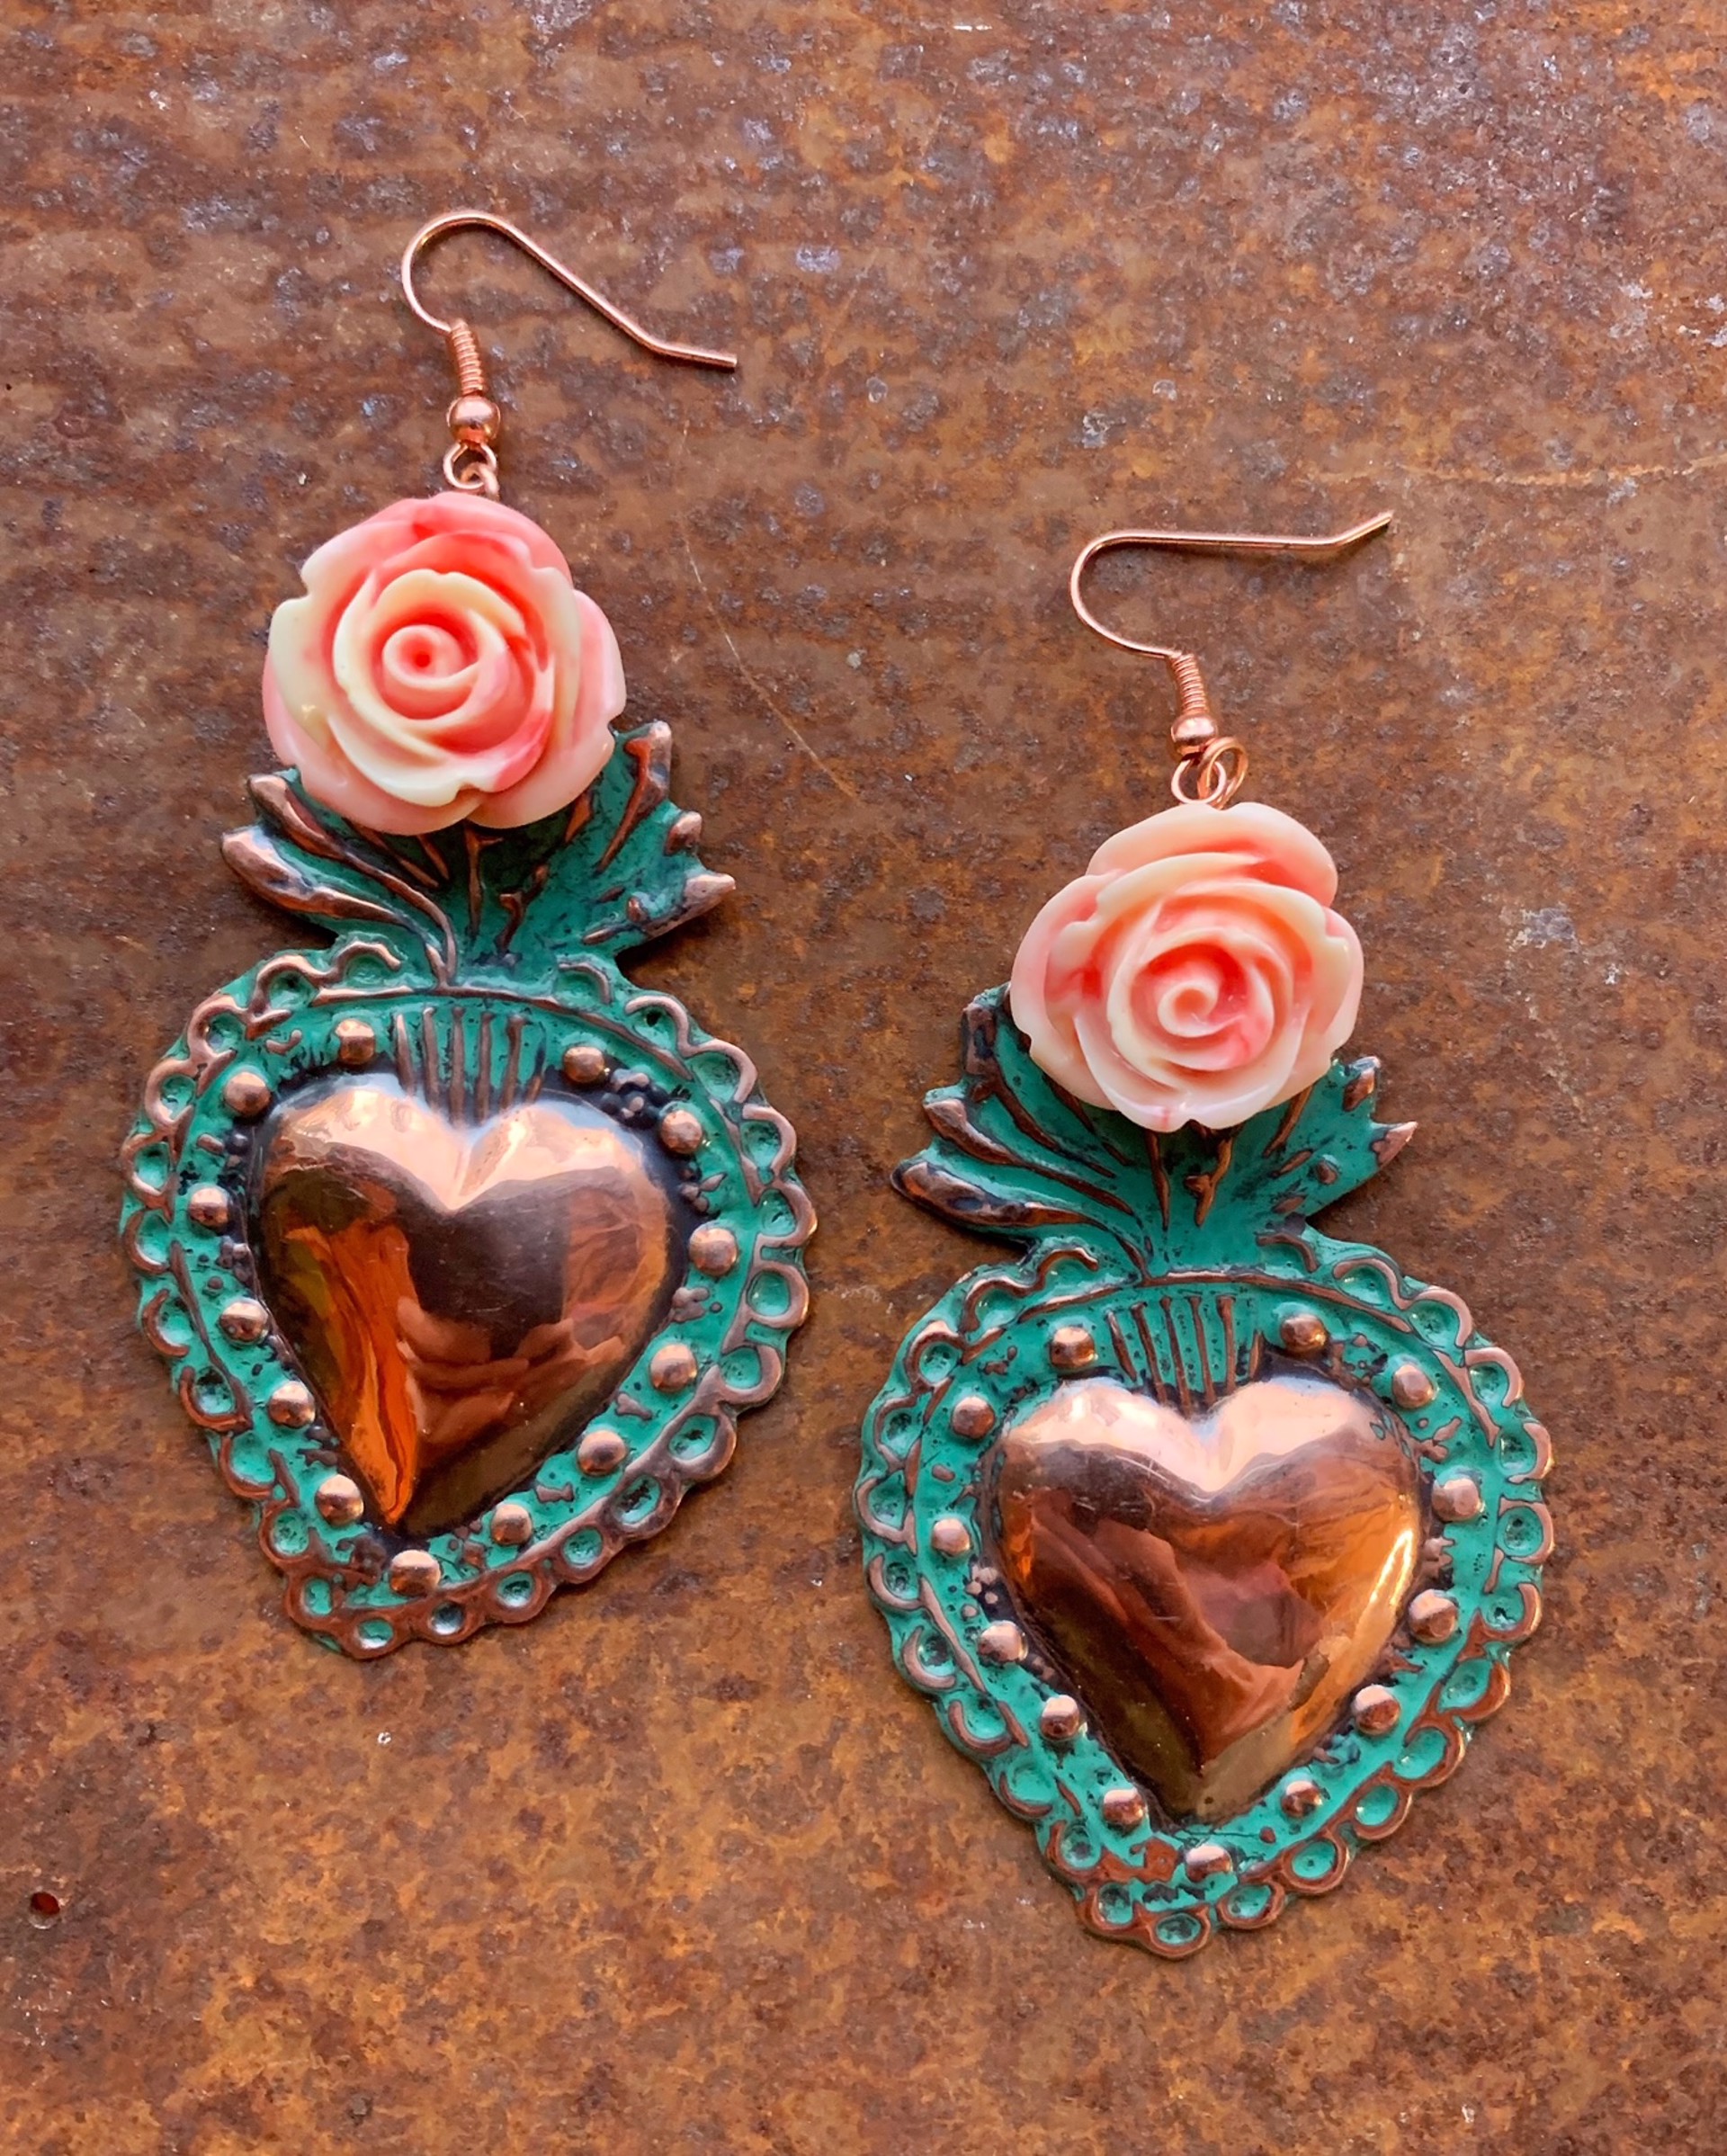 K799 Sacred Heart Earrings with Pink Roses by Kelly Ormsby